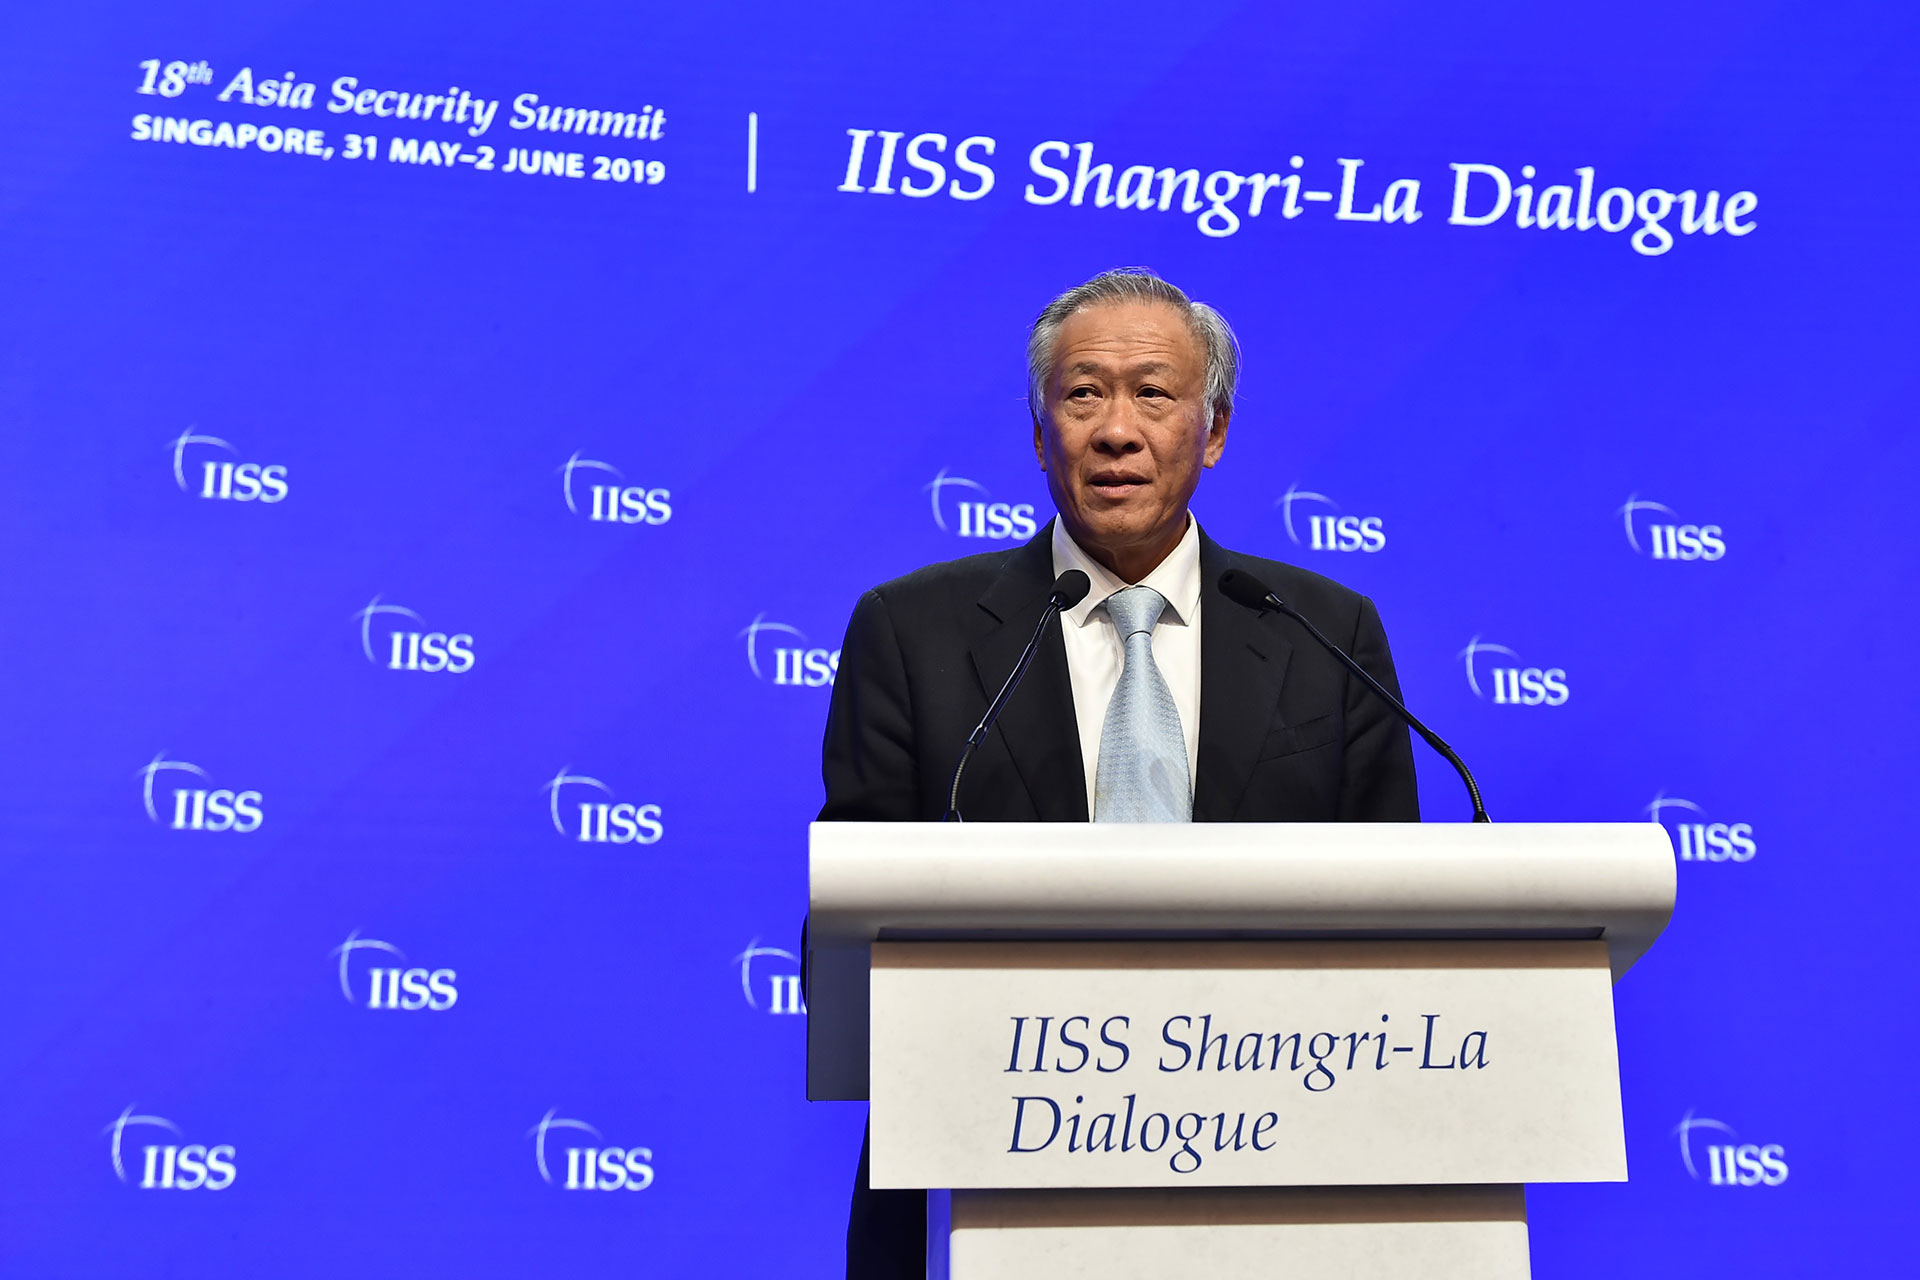 Minister for Defence Dr Ng Eng Hen speaking at the sixth plenary session on the topic - "Ensuring a Resilient and Stable Region", at the 18th Shangri-La Dialogue earlier today.